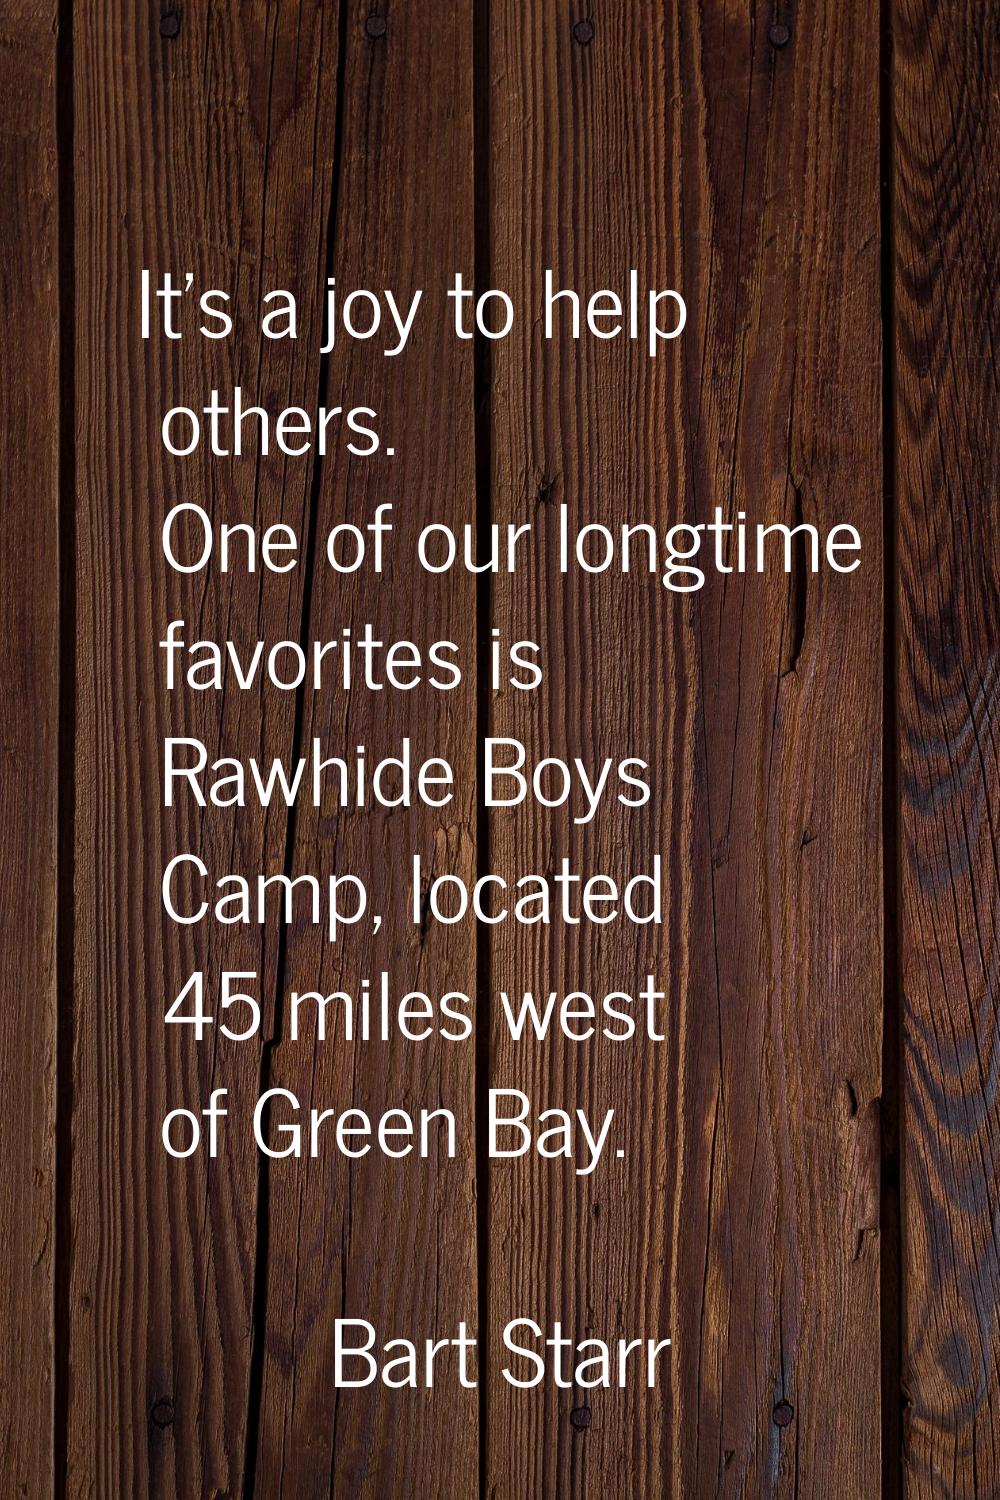 It's a joy to help others. One of our longtime favorites is Rawhide Boys Camp, located 45 miles wes